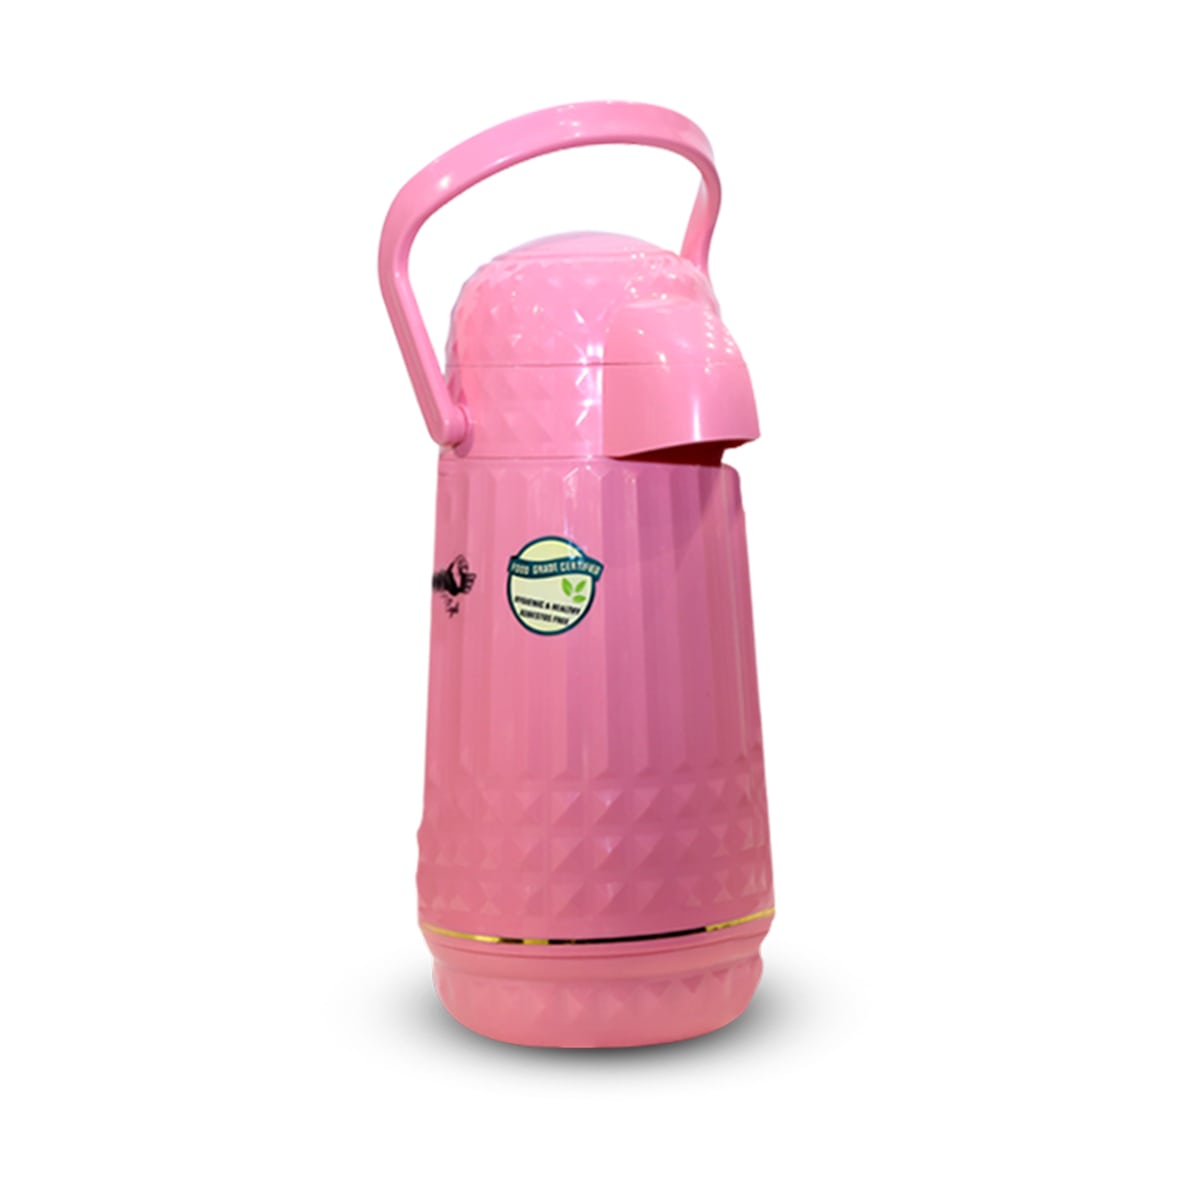 Happy Air pot thermos (1 Liter)